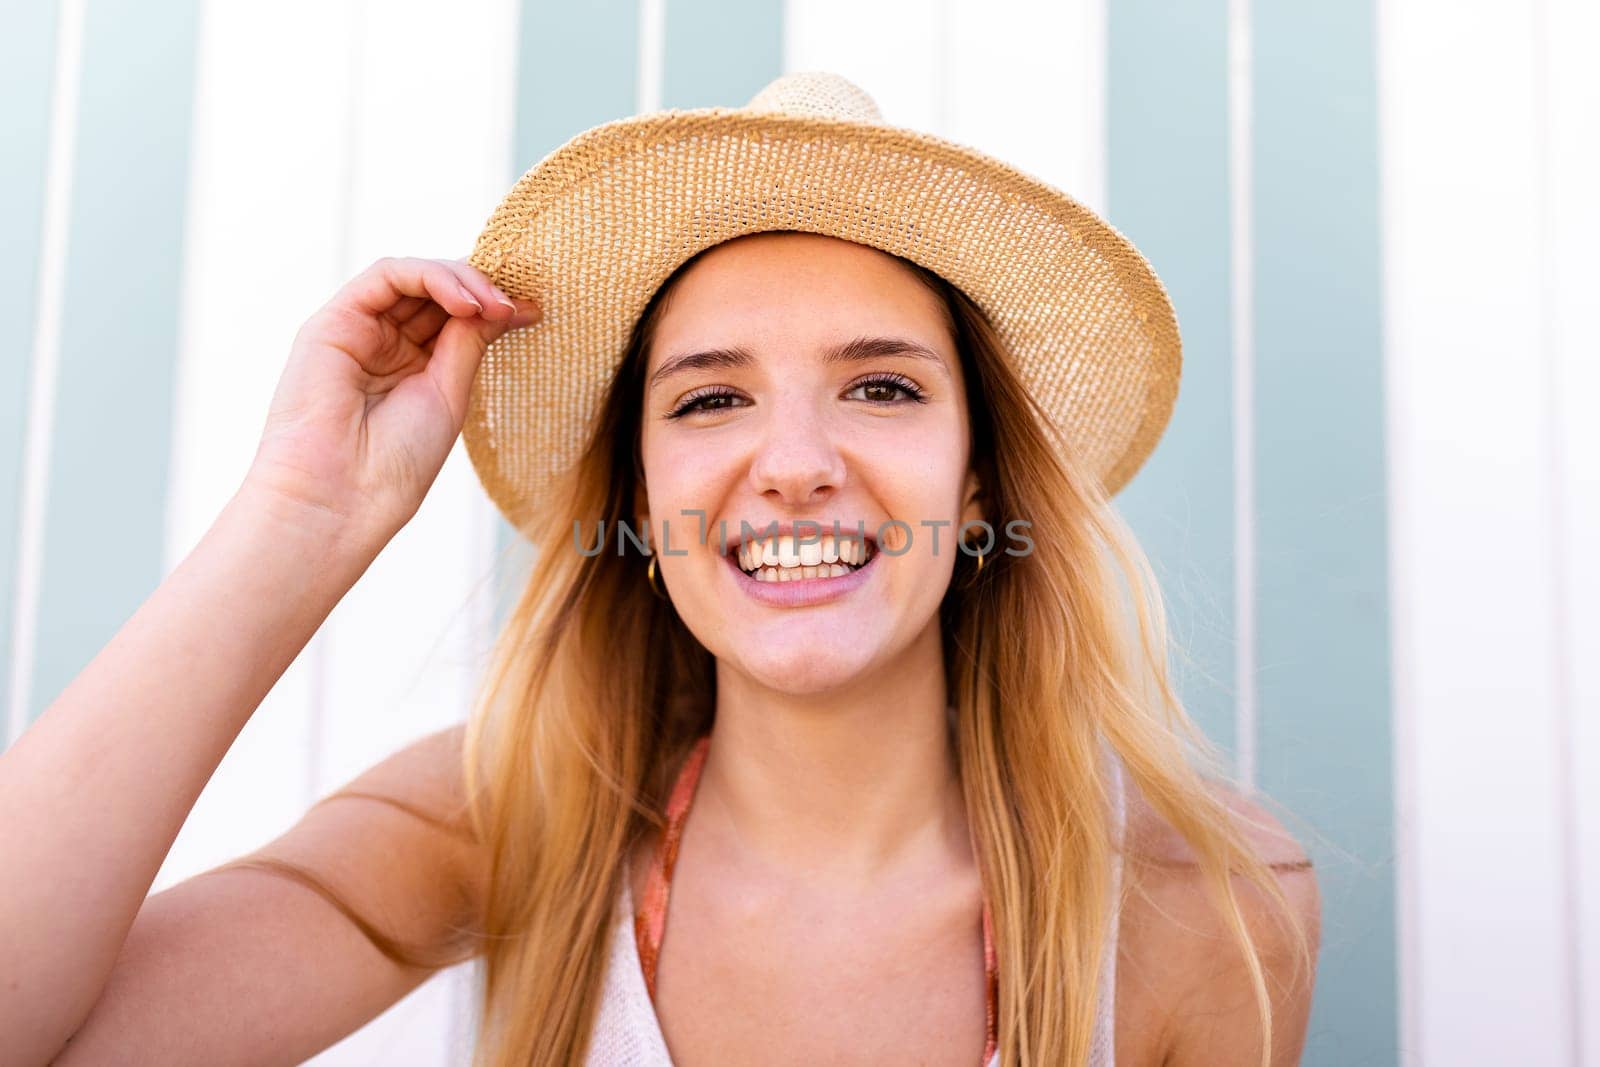 Headshot of young happy blond woman wearing summer hat looking at camera. Lifestyle concept.